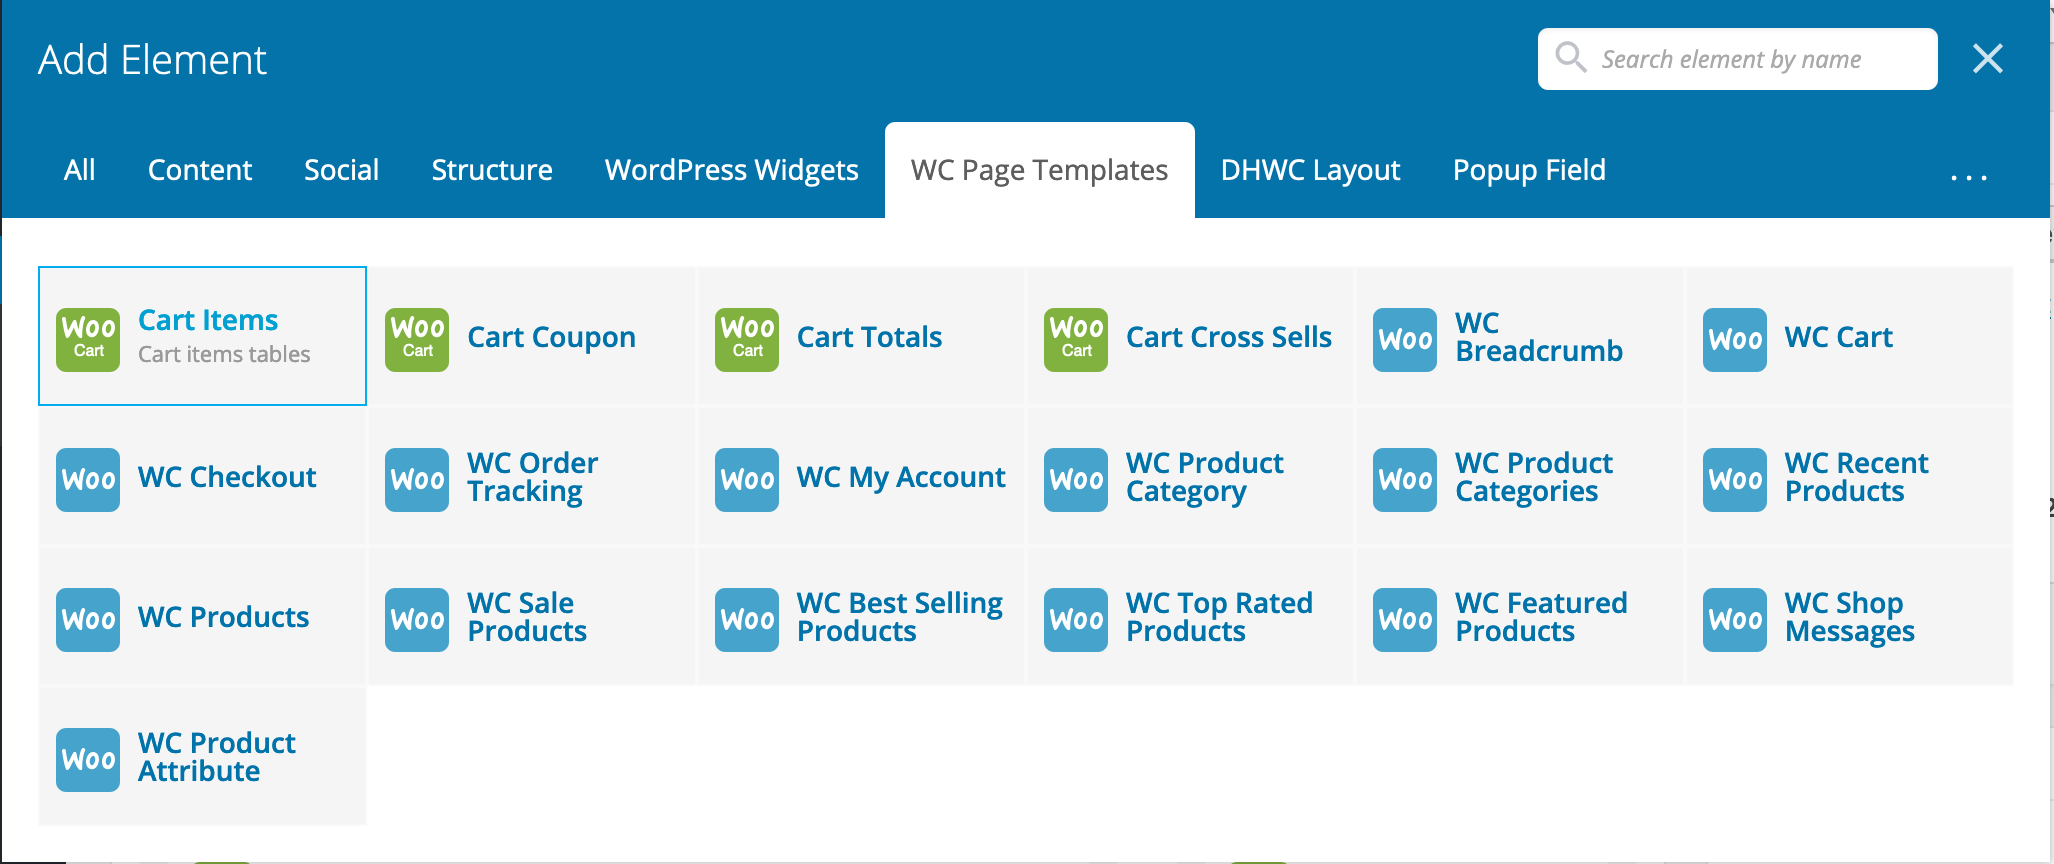 DHWCPage - WooCommerce Page Template Builder - 6